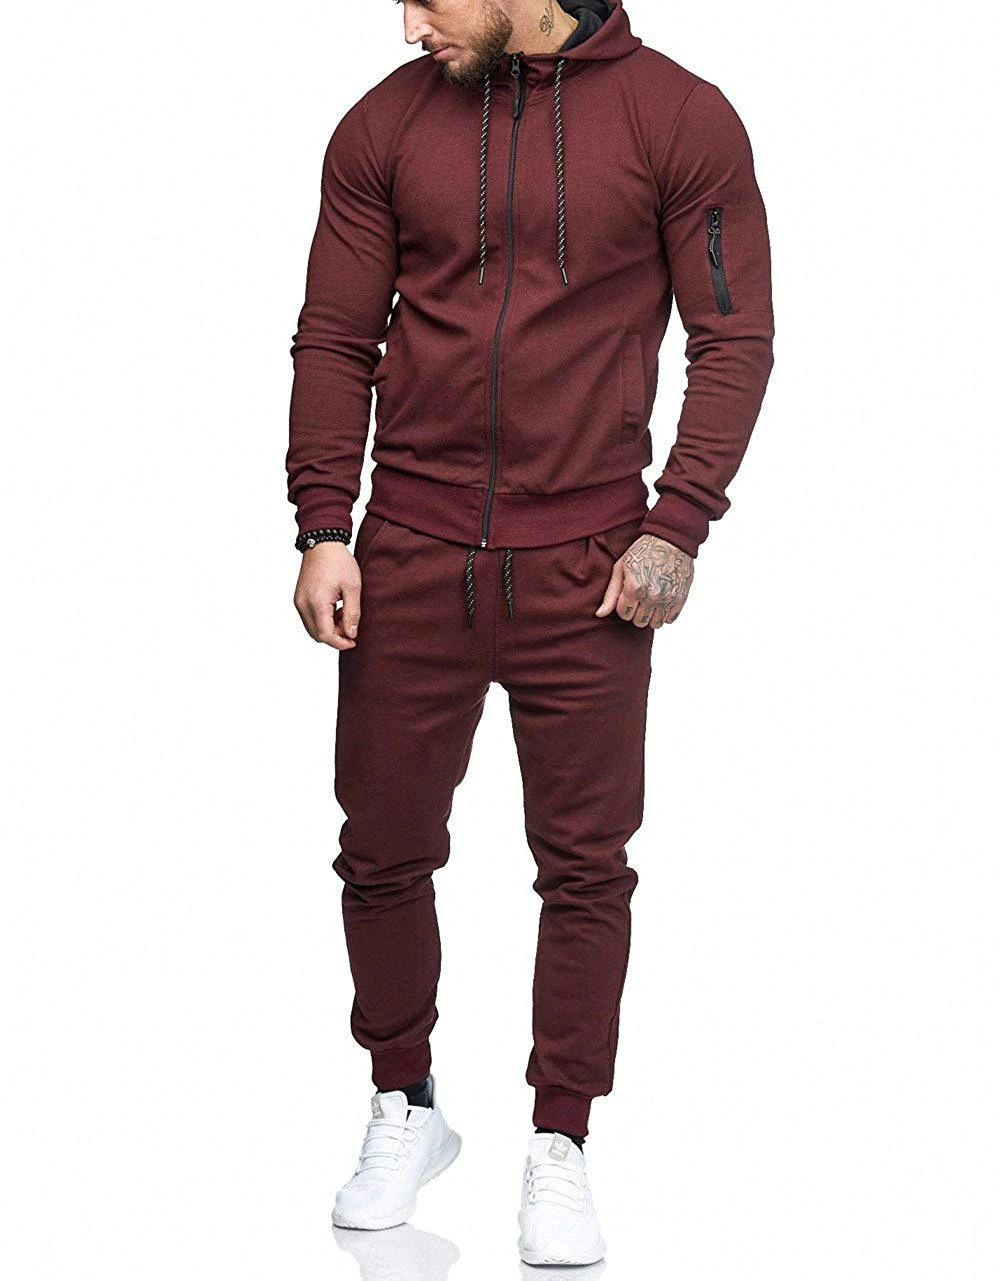 QYOURE MT03 Custom Logo OEM Jogger Sets Wholesale Clothes 100% Polyester Outfit Men Track Suits Tracksuits